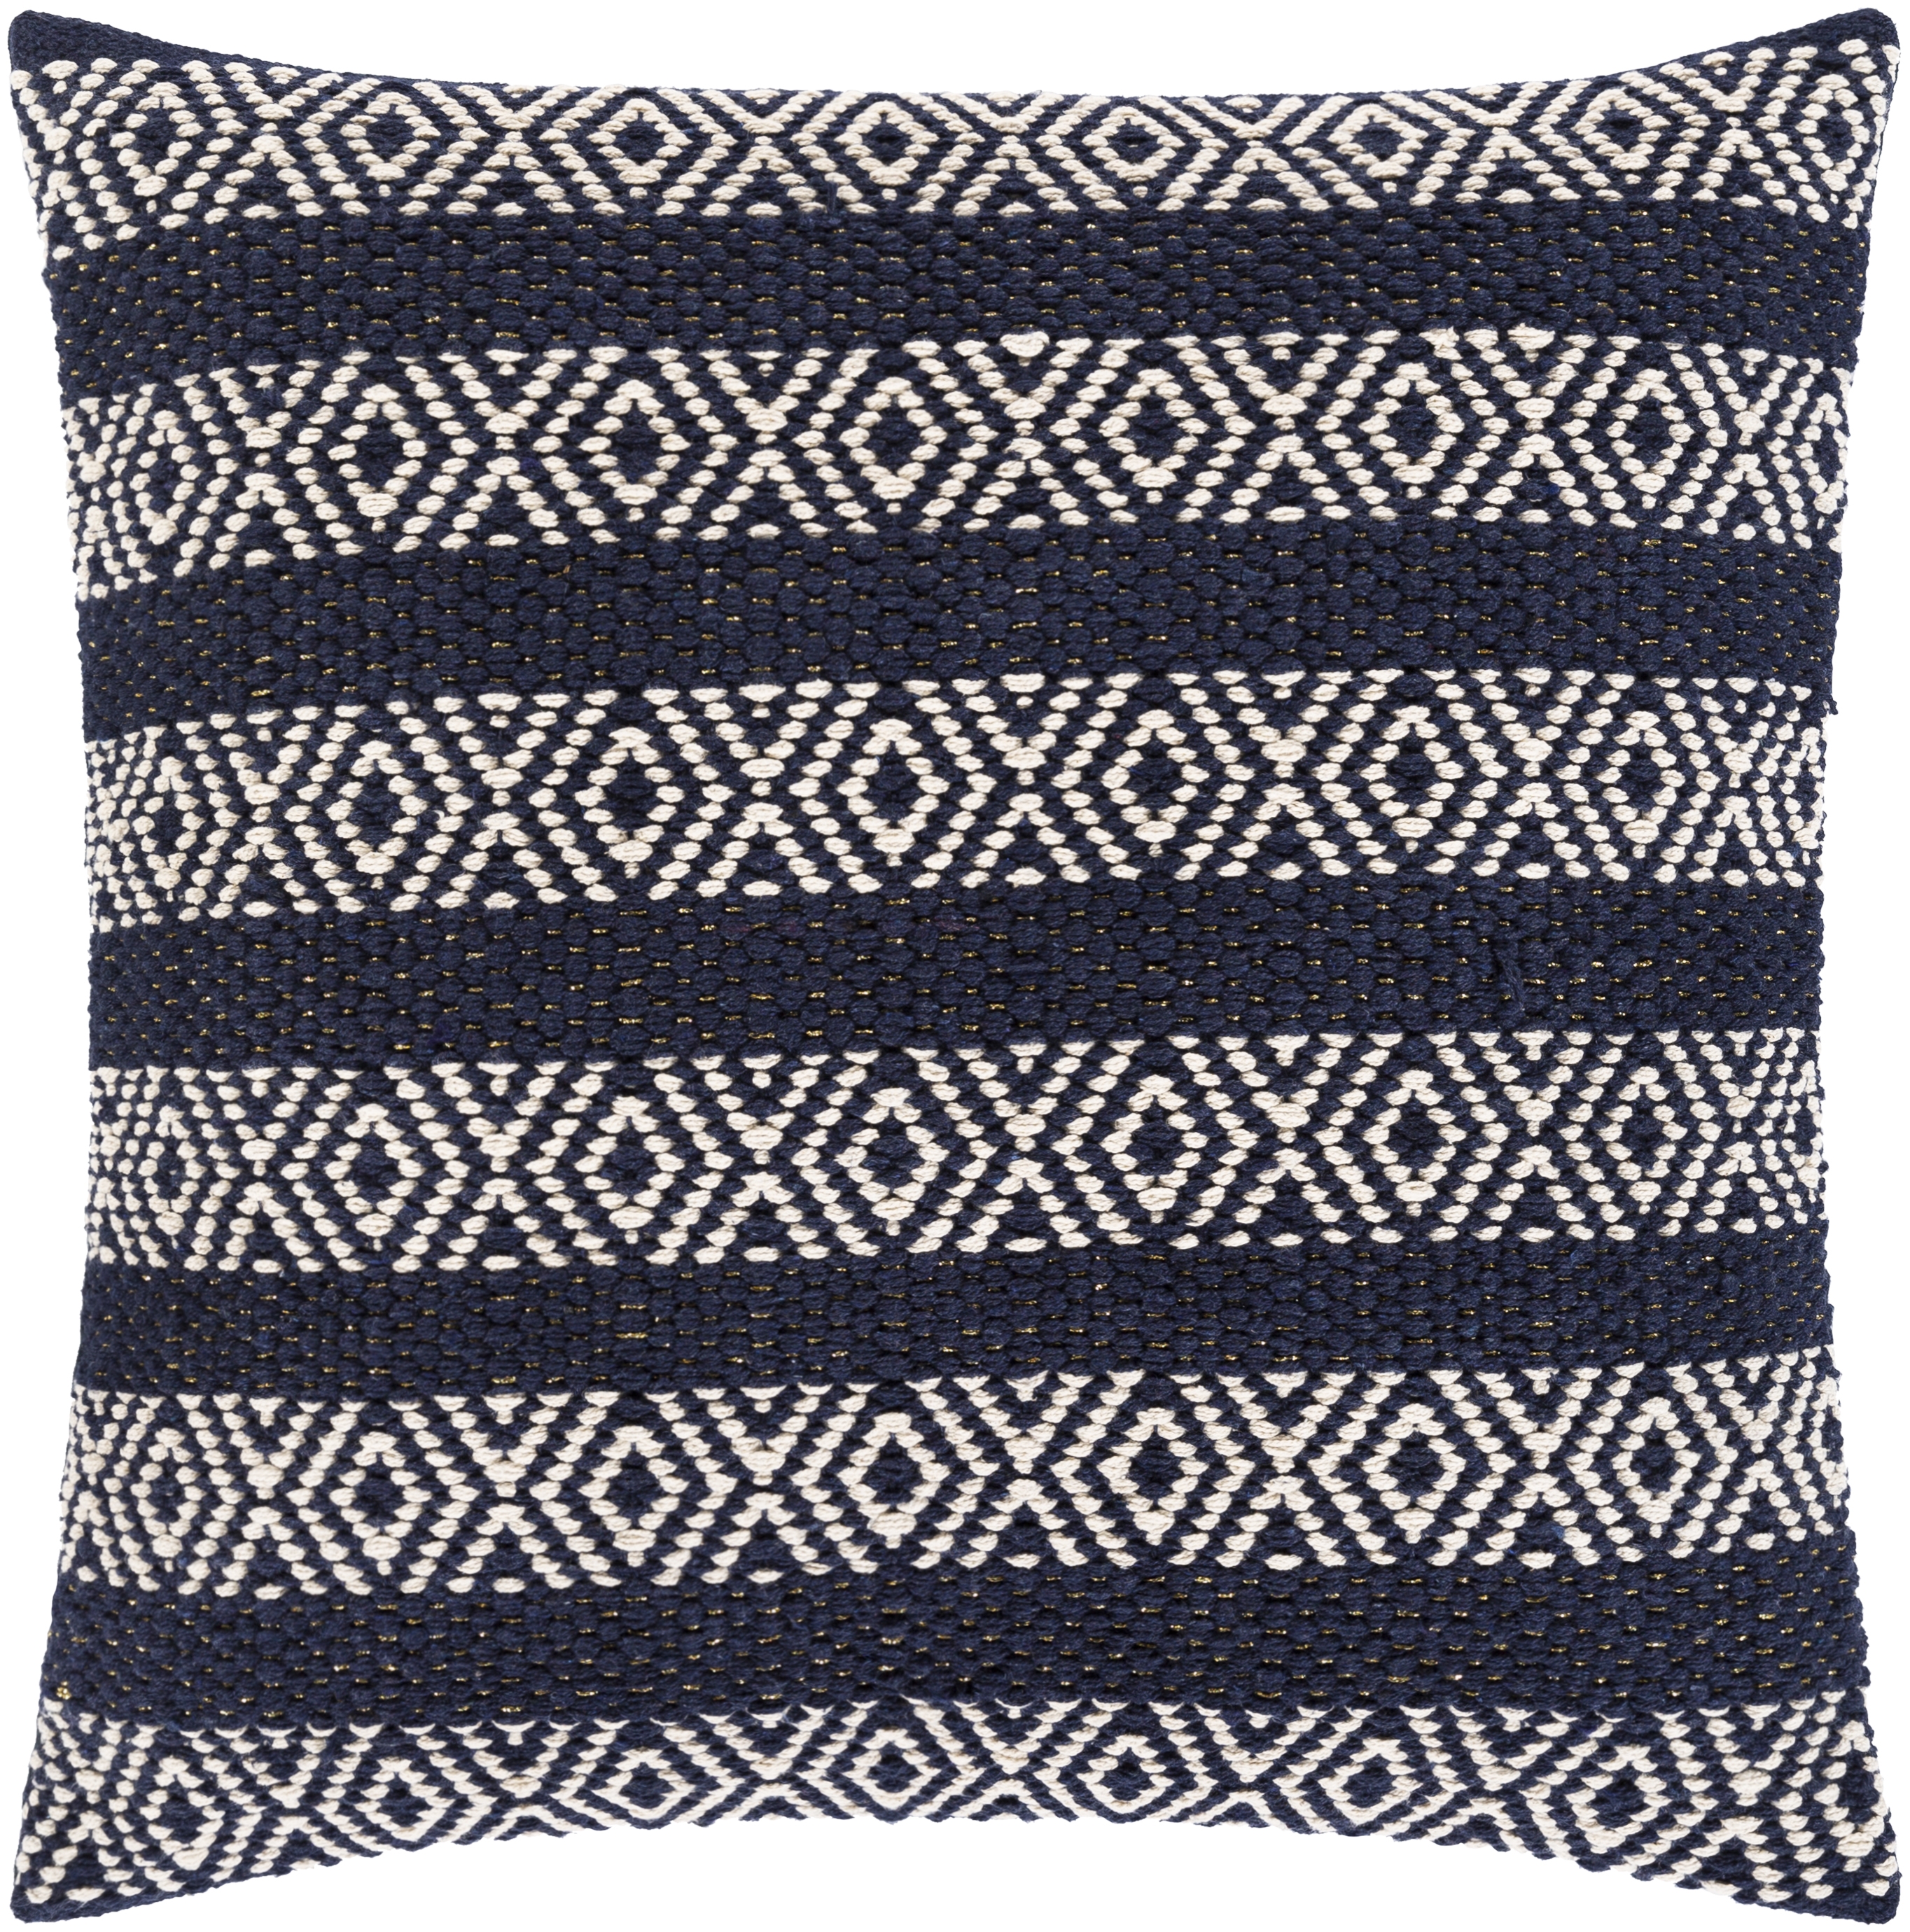 Ibiza - IBZ-003 - 20" x 20" - pillow cover only - Image 0